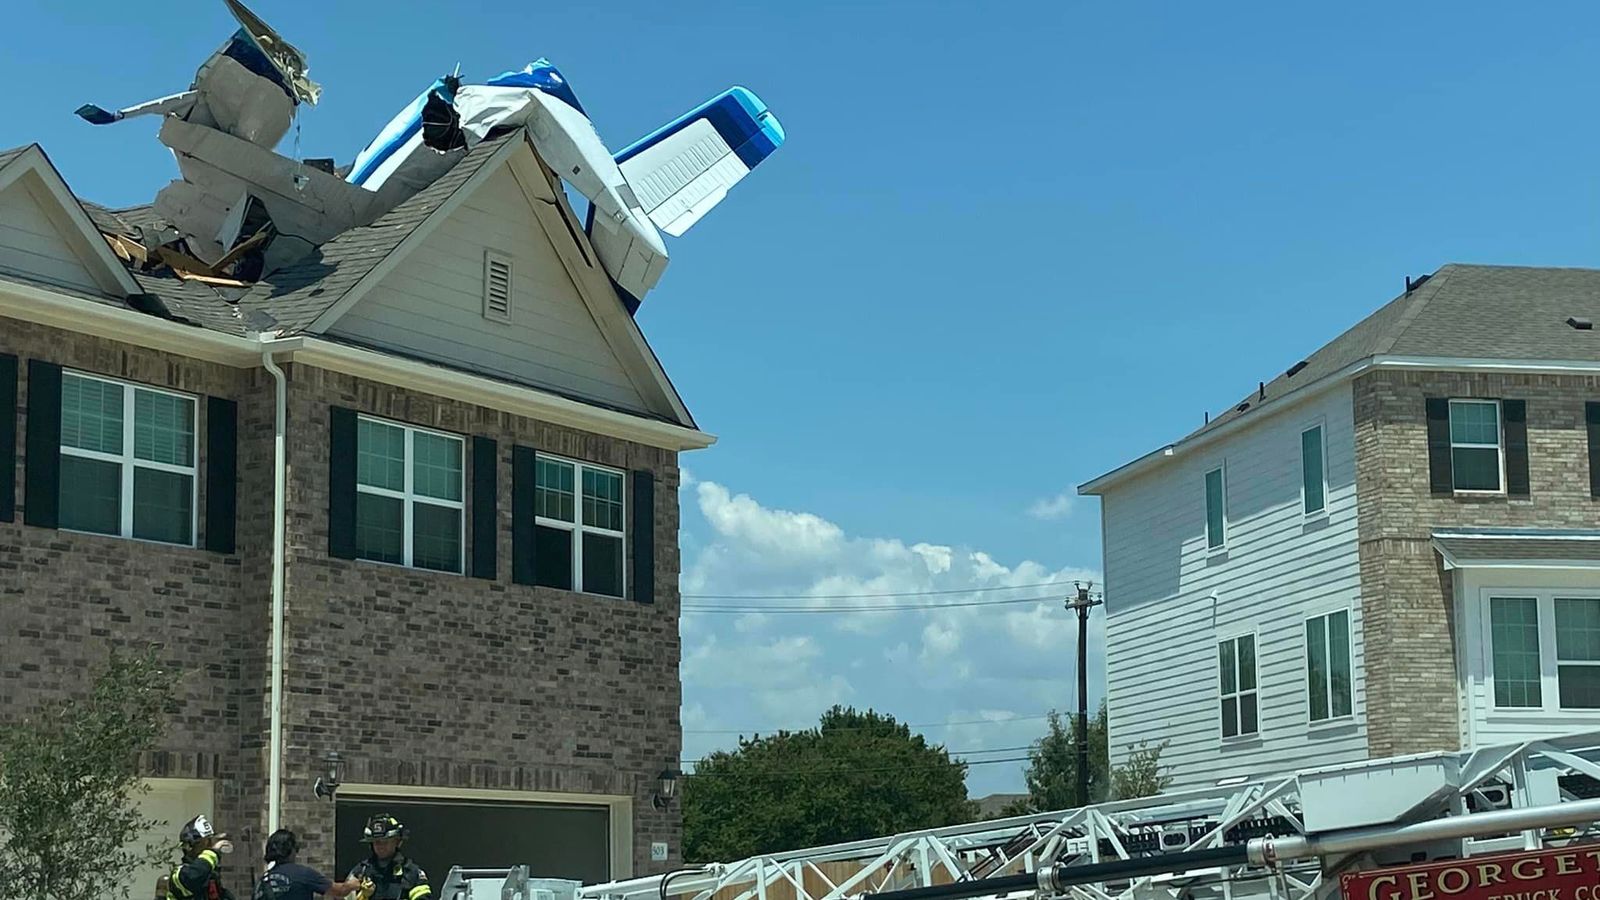 Plane crashes into roof of Texas home